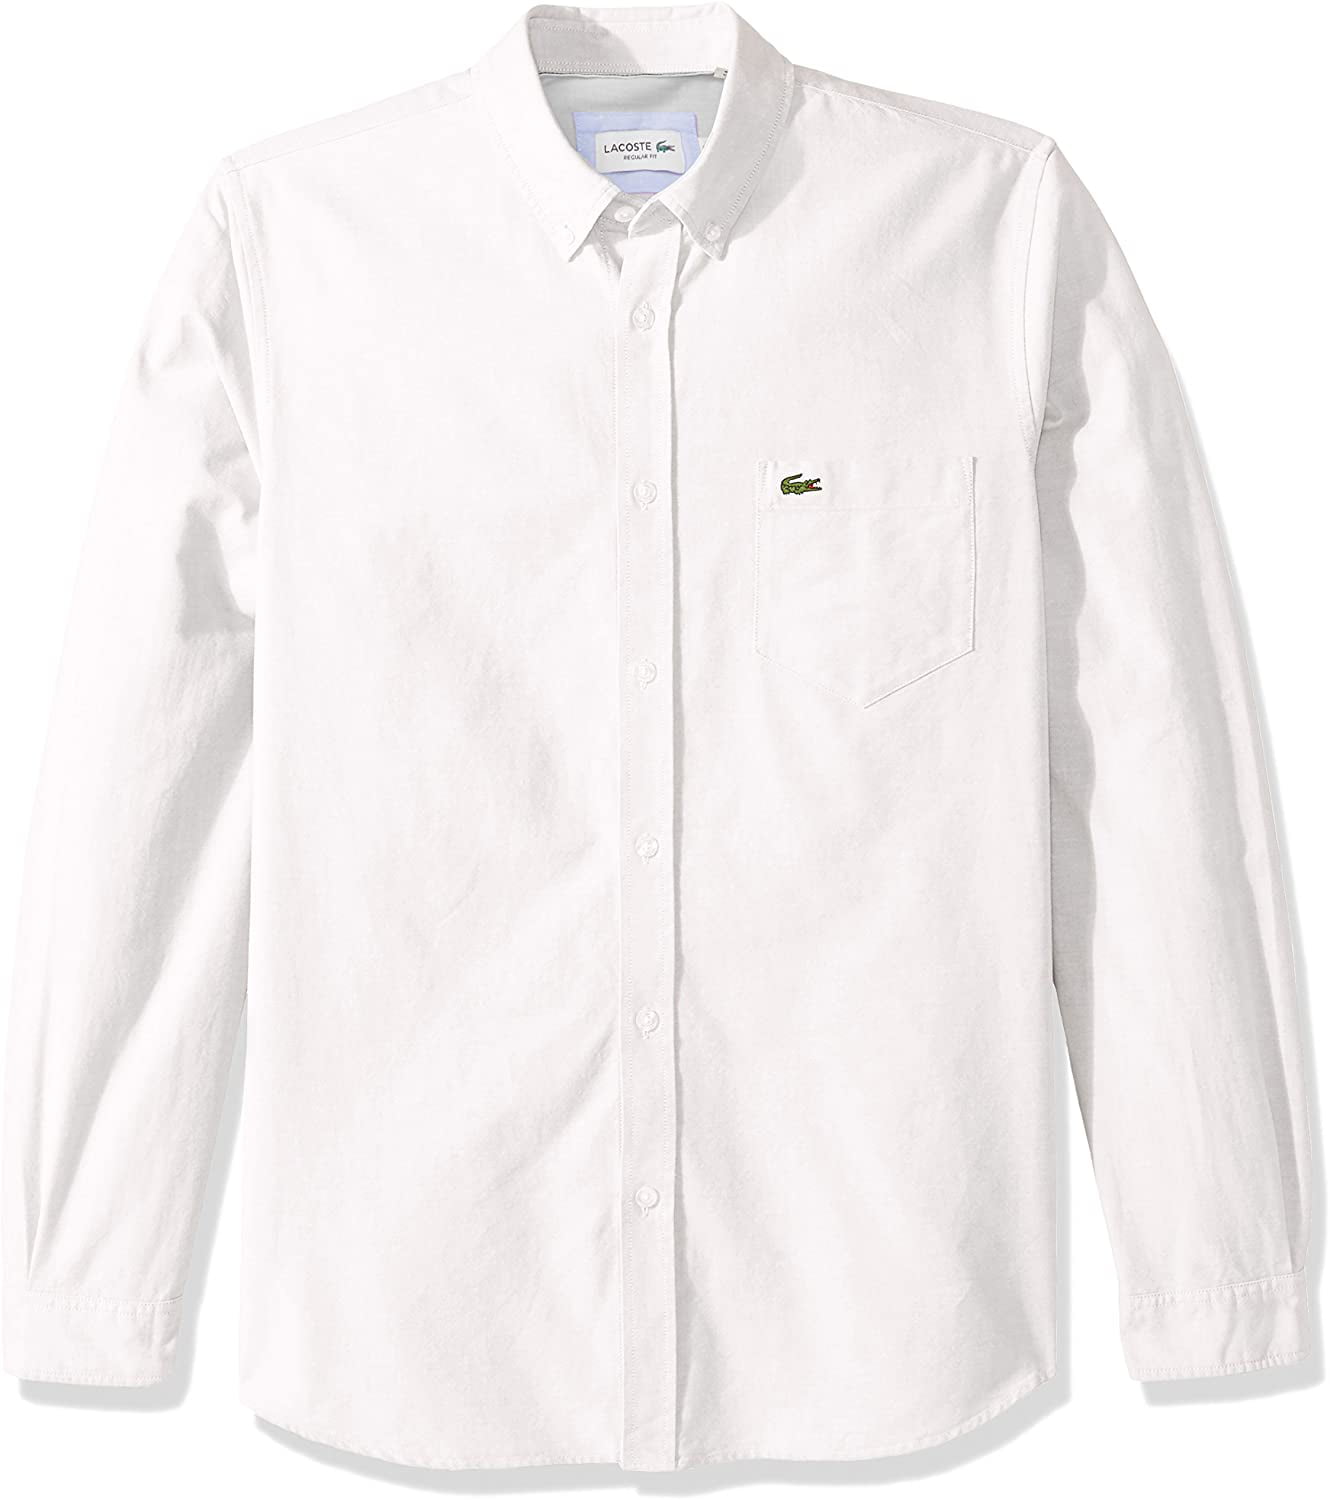 Lacoste Mens Long Sleeve Oxford Fit Woven Button Down Shirt -